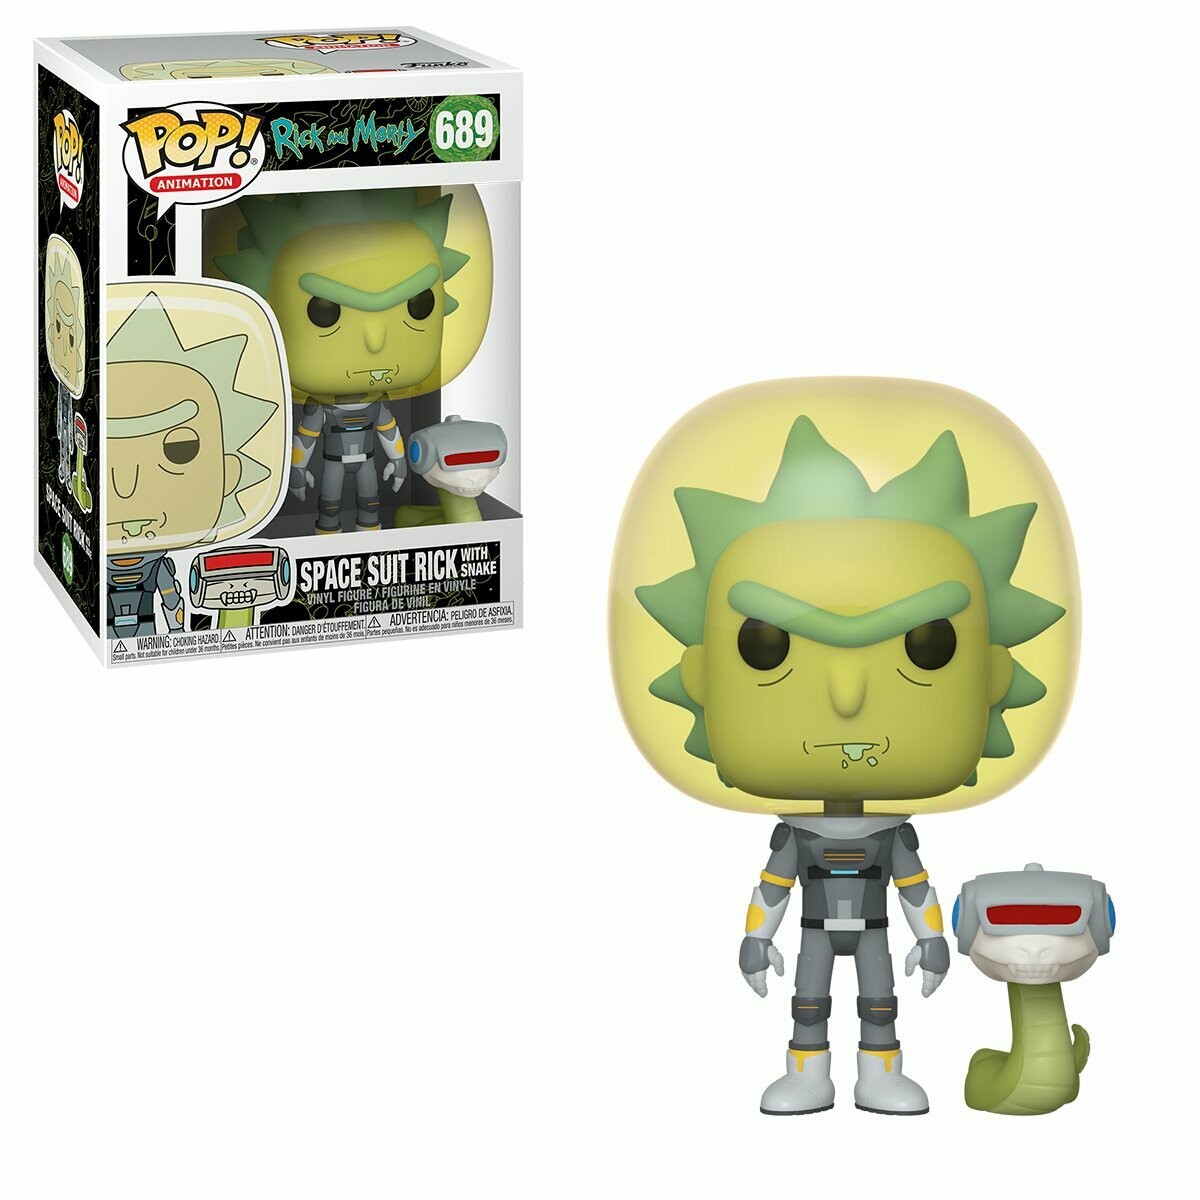 Funko Rick and Morty Space Suit Rick With Snake Pop! Vinyl Figure